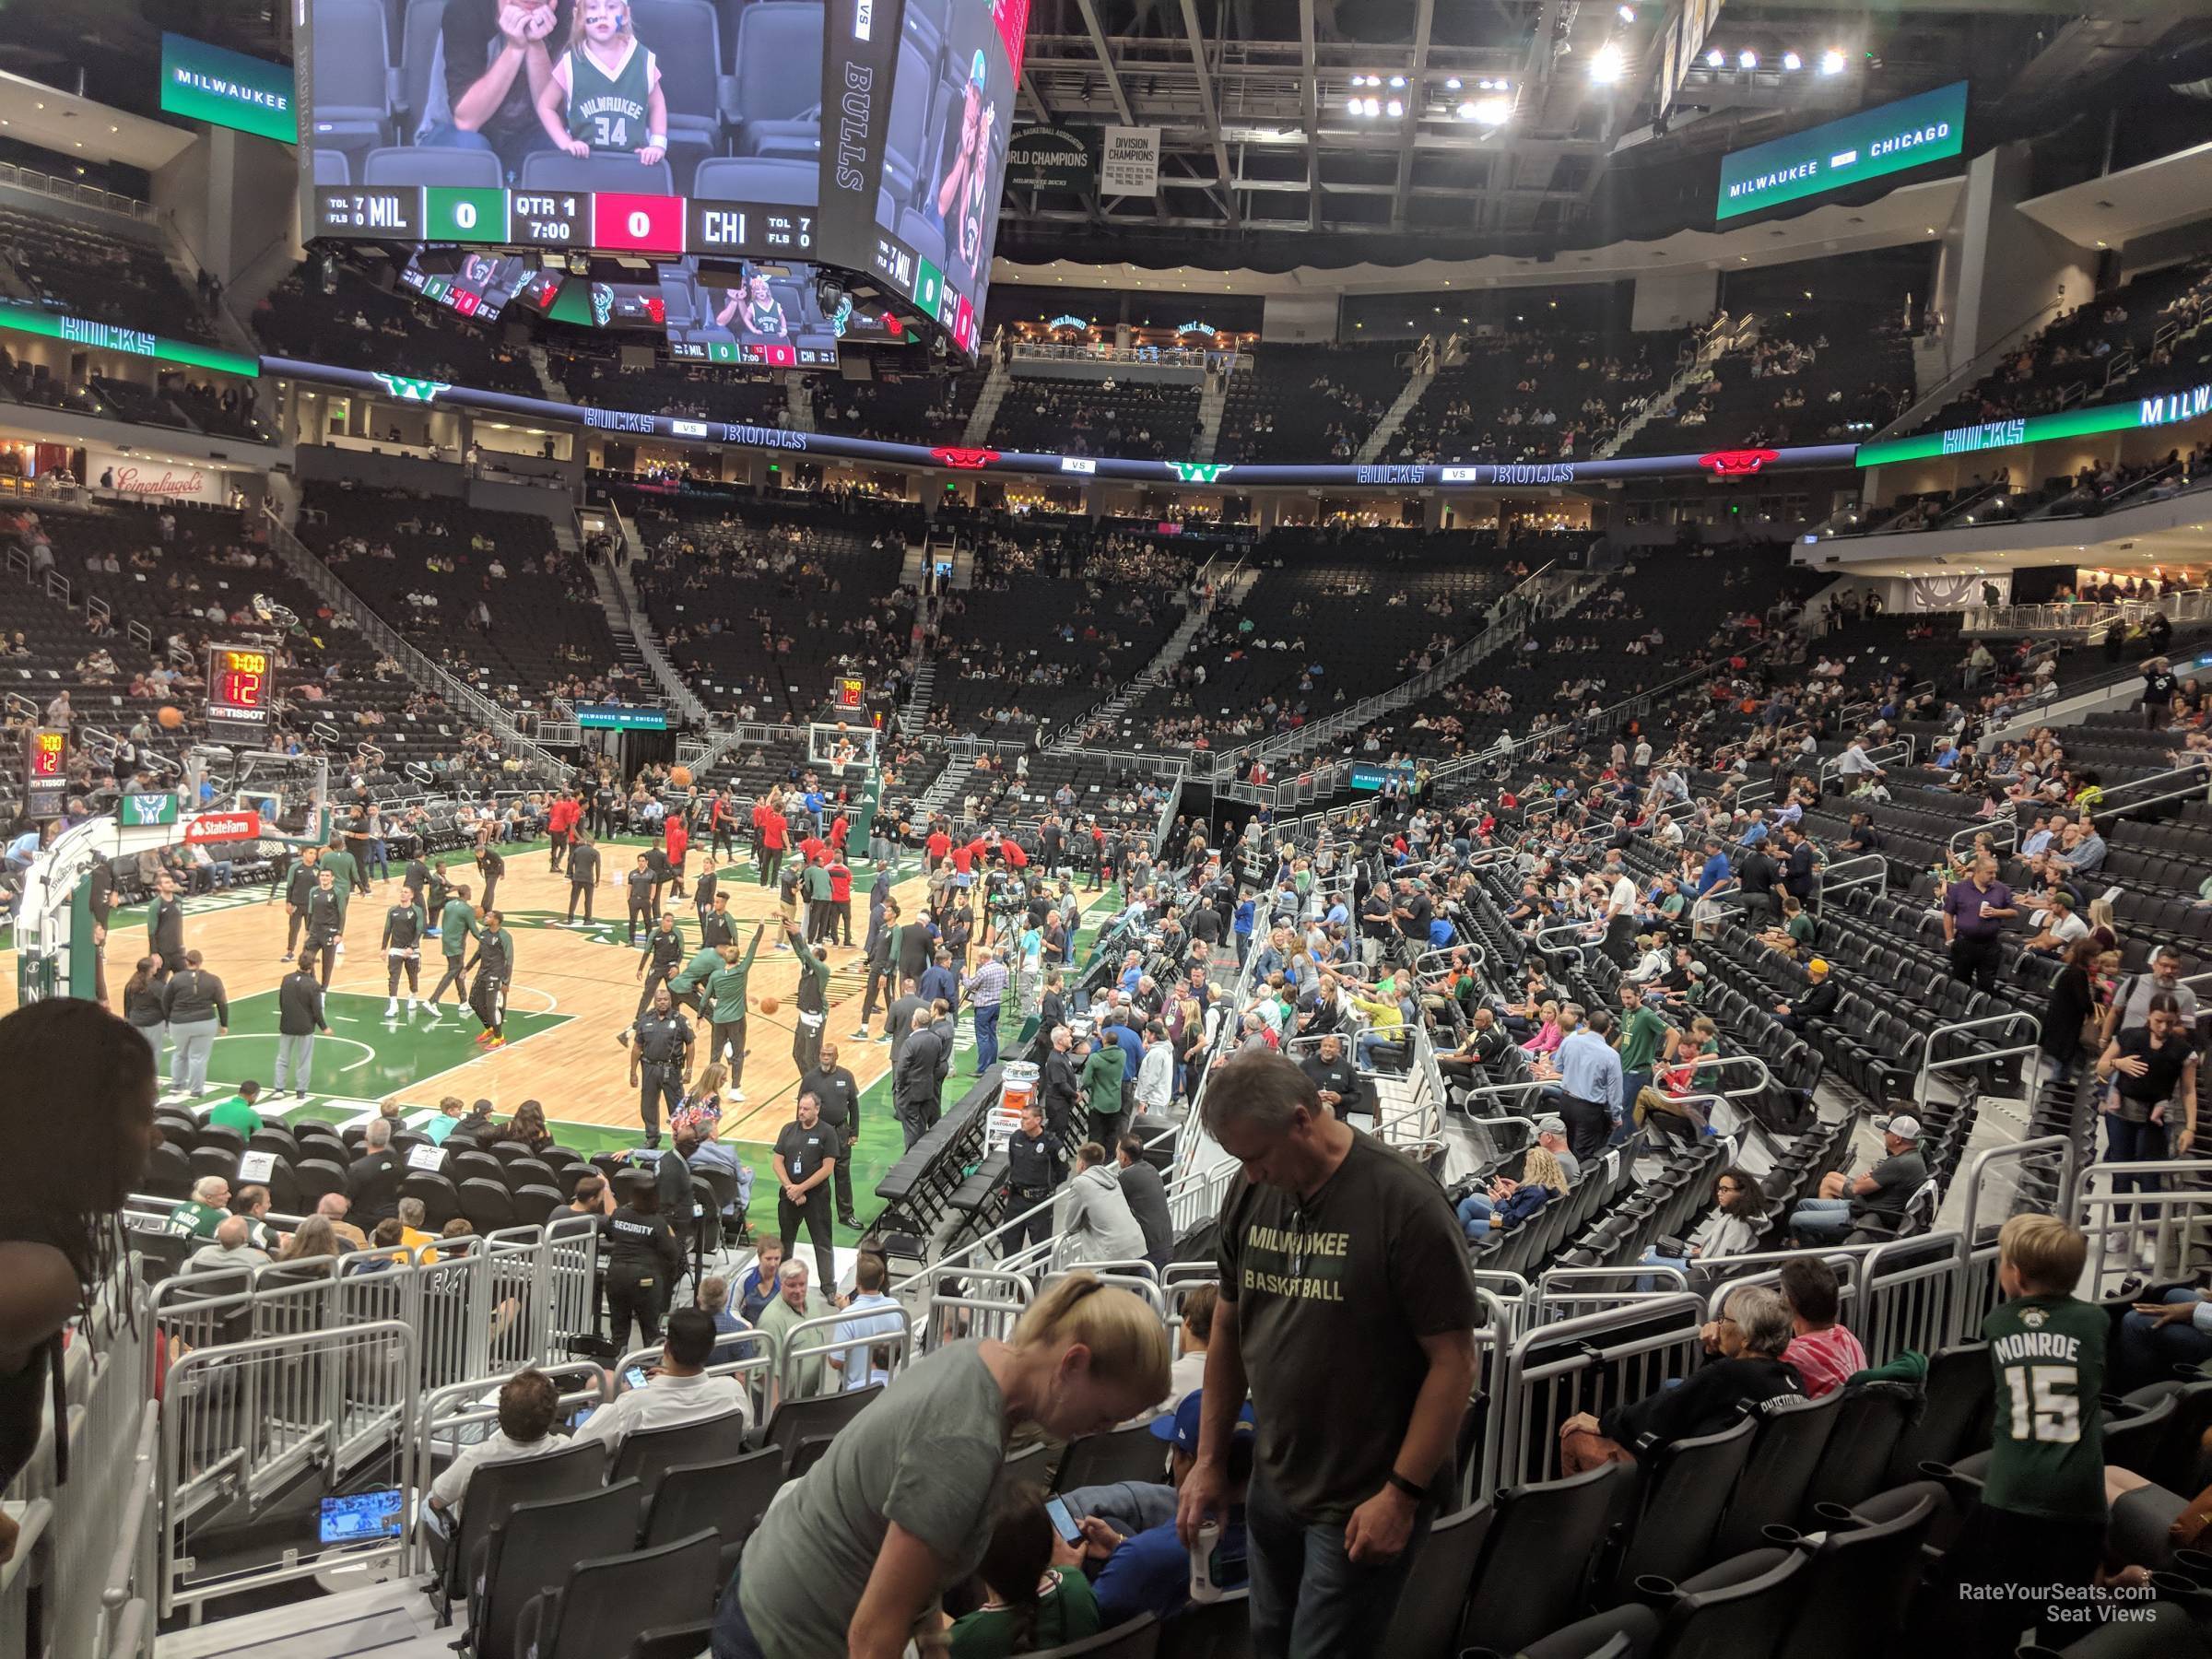 section 120, row 13 seat view  for basketball - fiserv forum